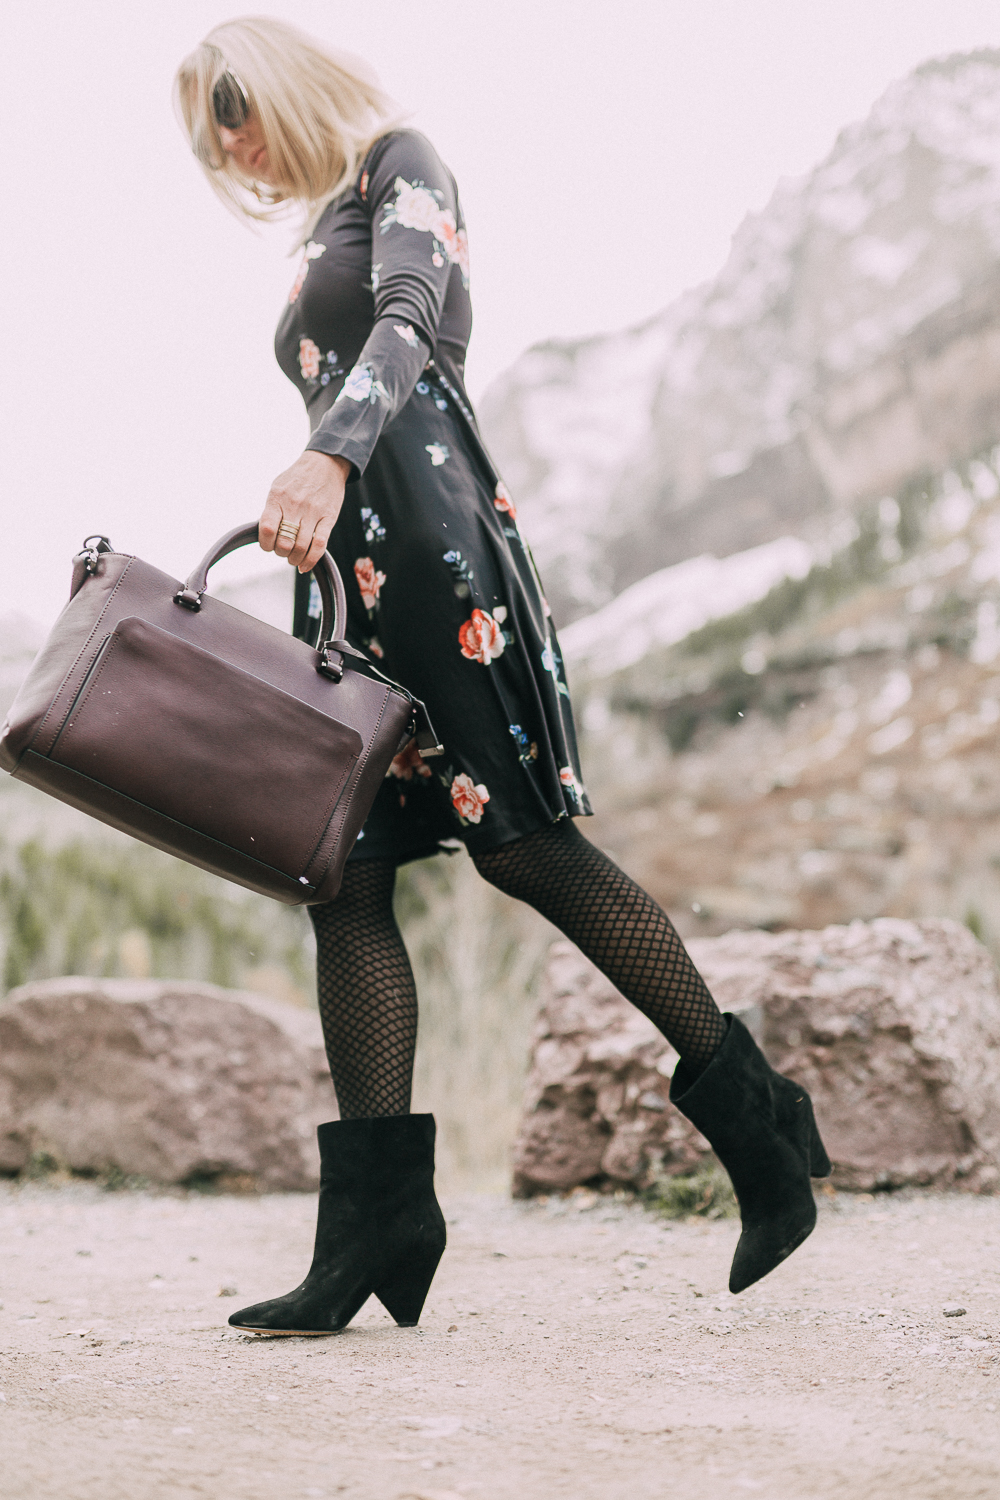 black regina suede Booties by Vince Camuto paired with black floral print dress and burgundy leather tote bag on blonde woman in rocky mountains